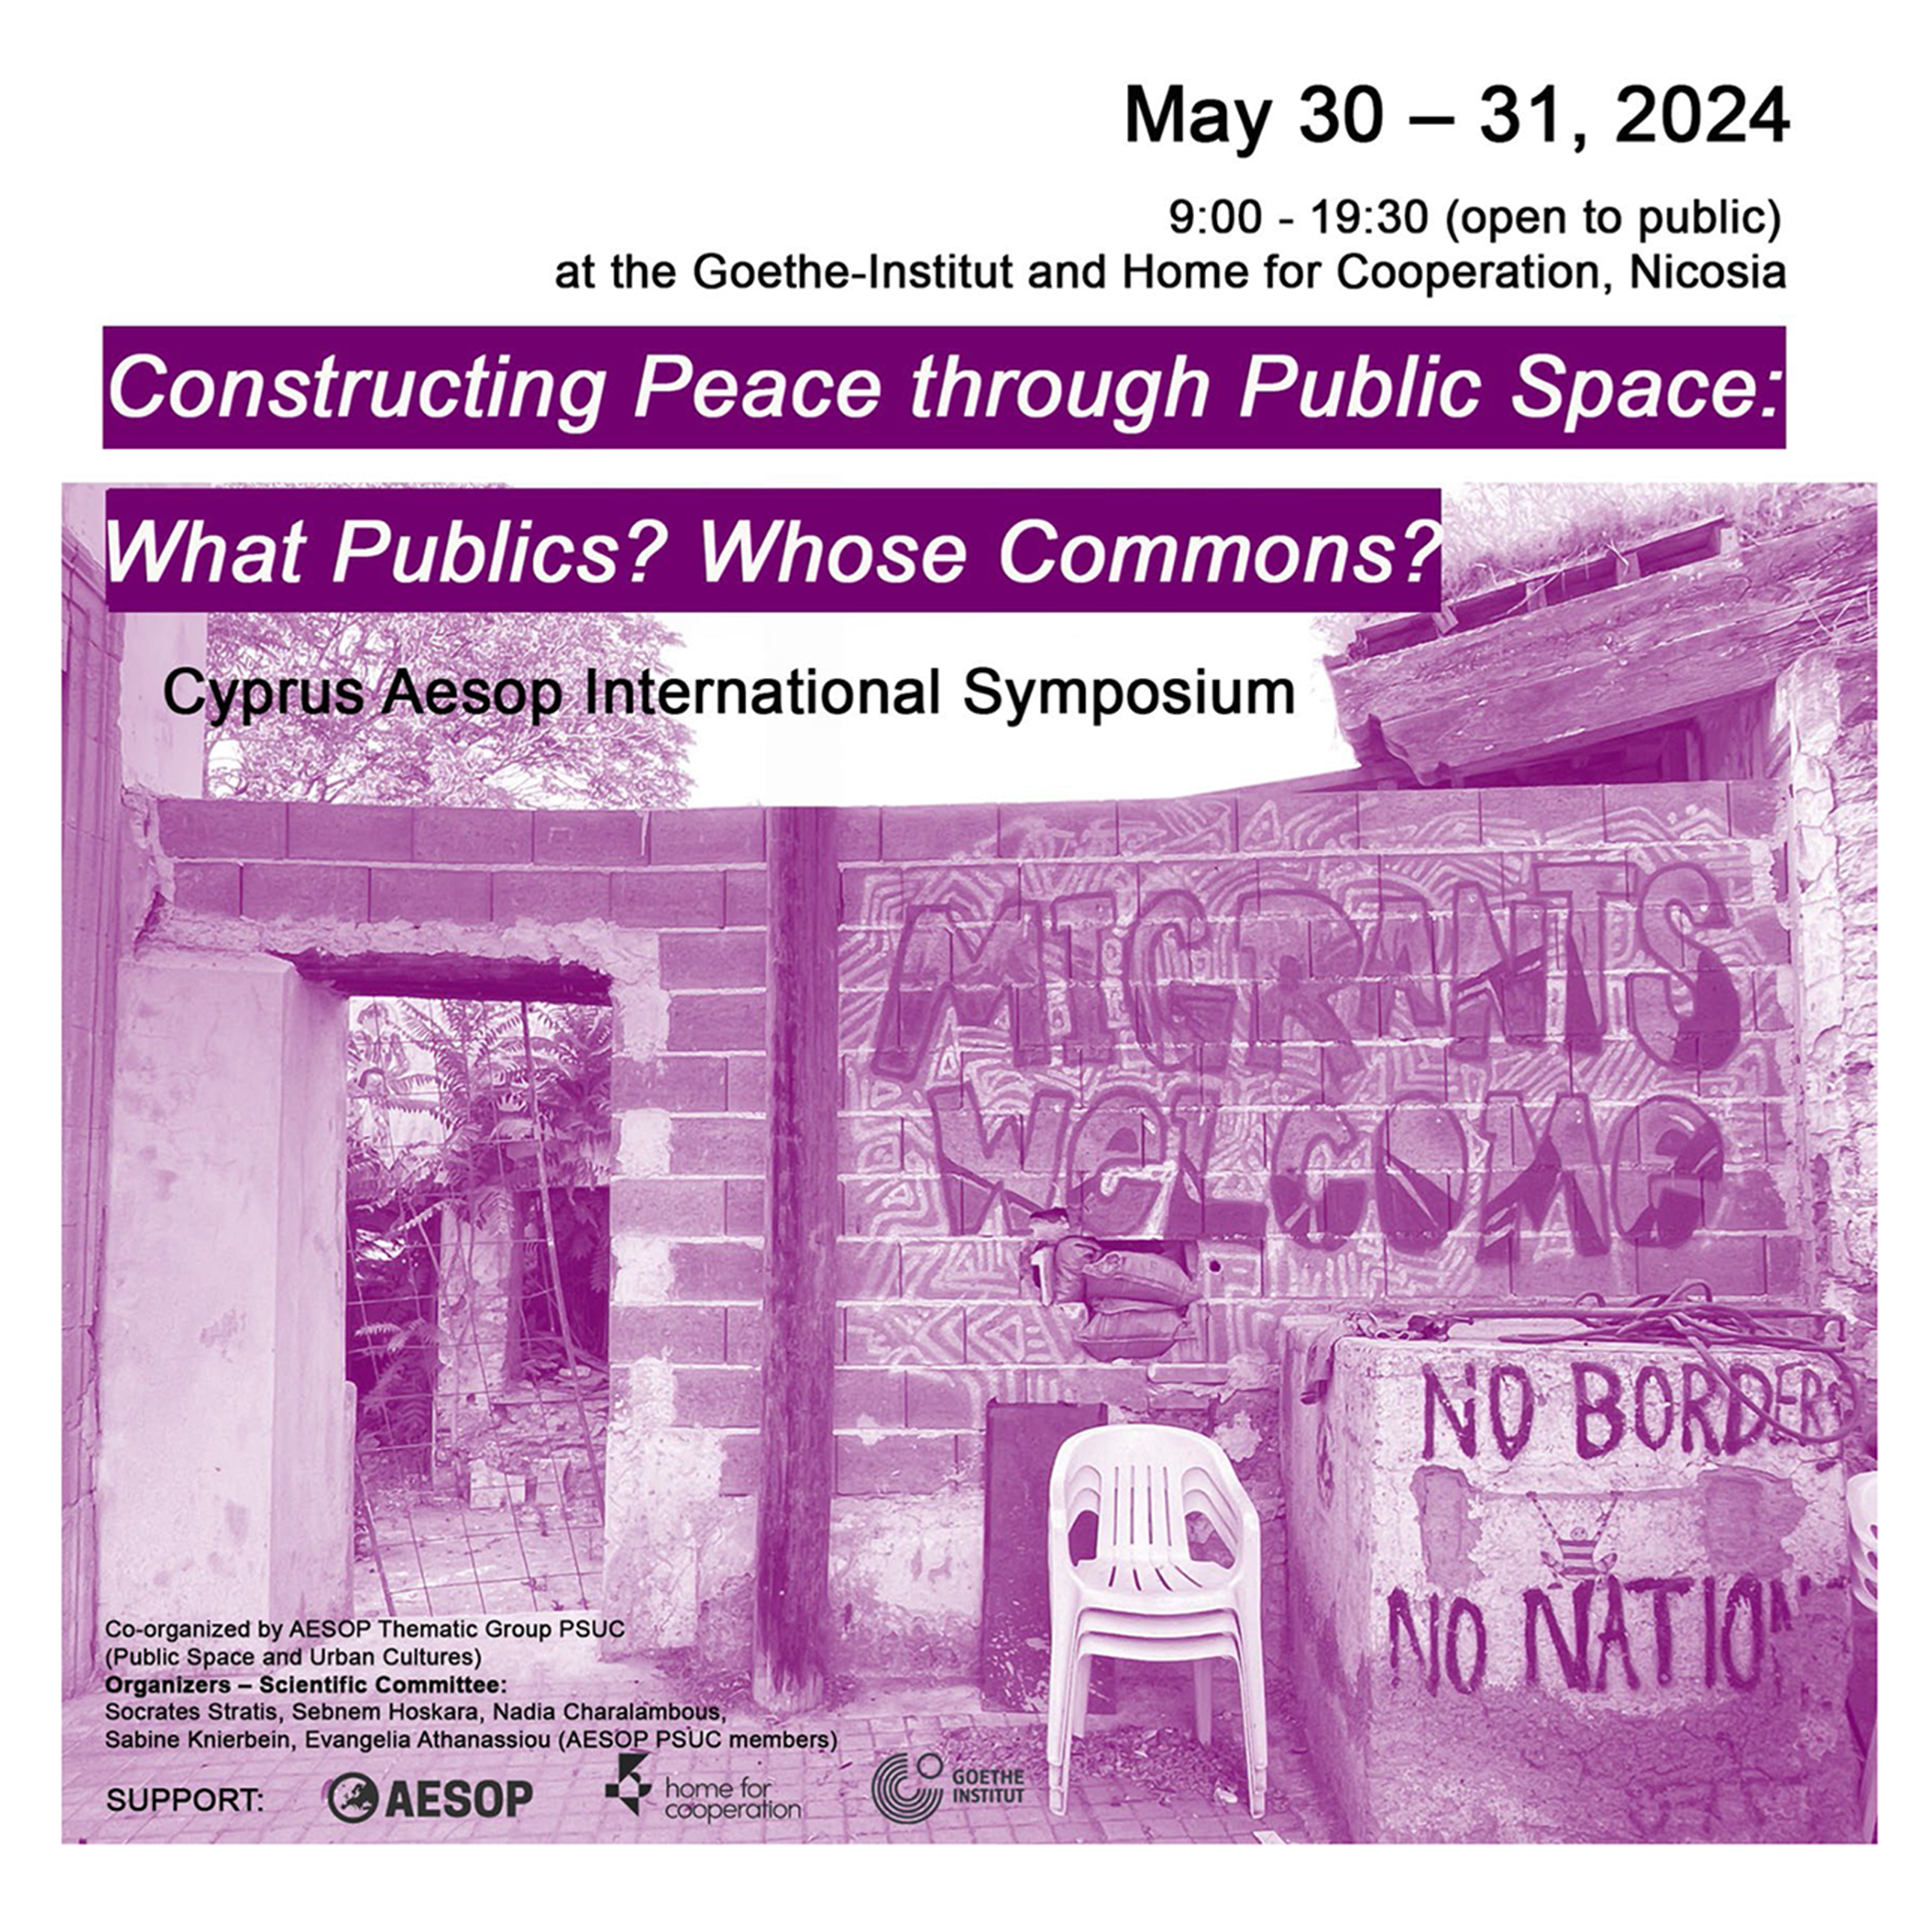 Constructing Peace through Public Space - Conference, Nicosia, May 30-31, 2024